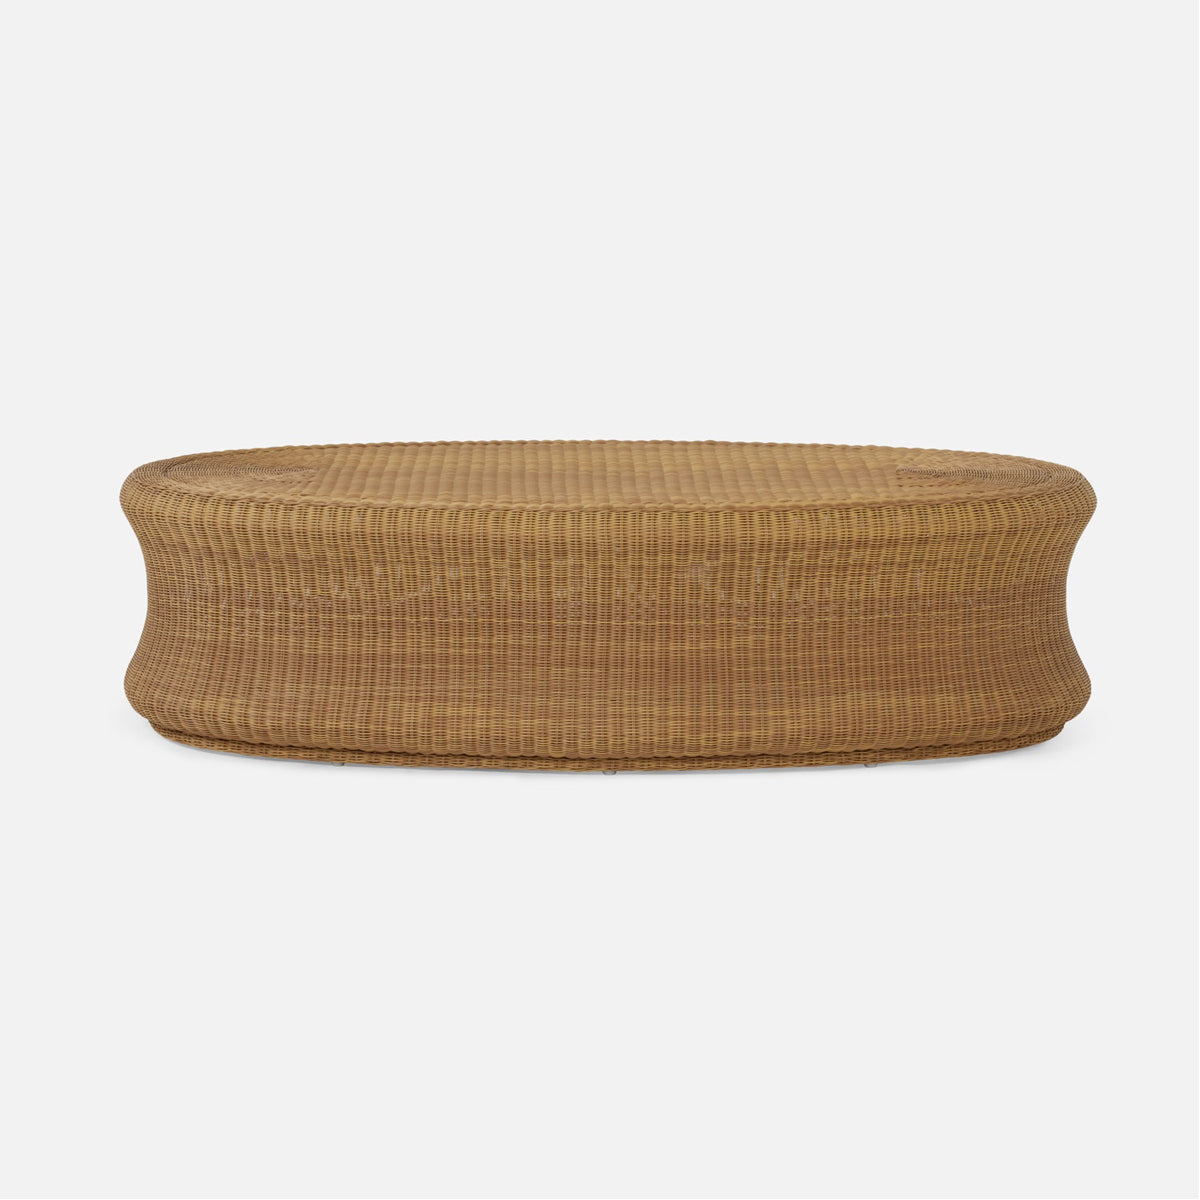 Made Goods Cecil Faux Wicker Oval Outdoor Coffee Table